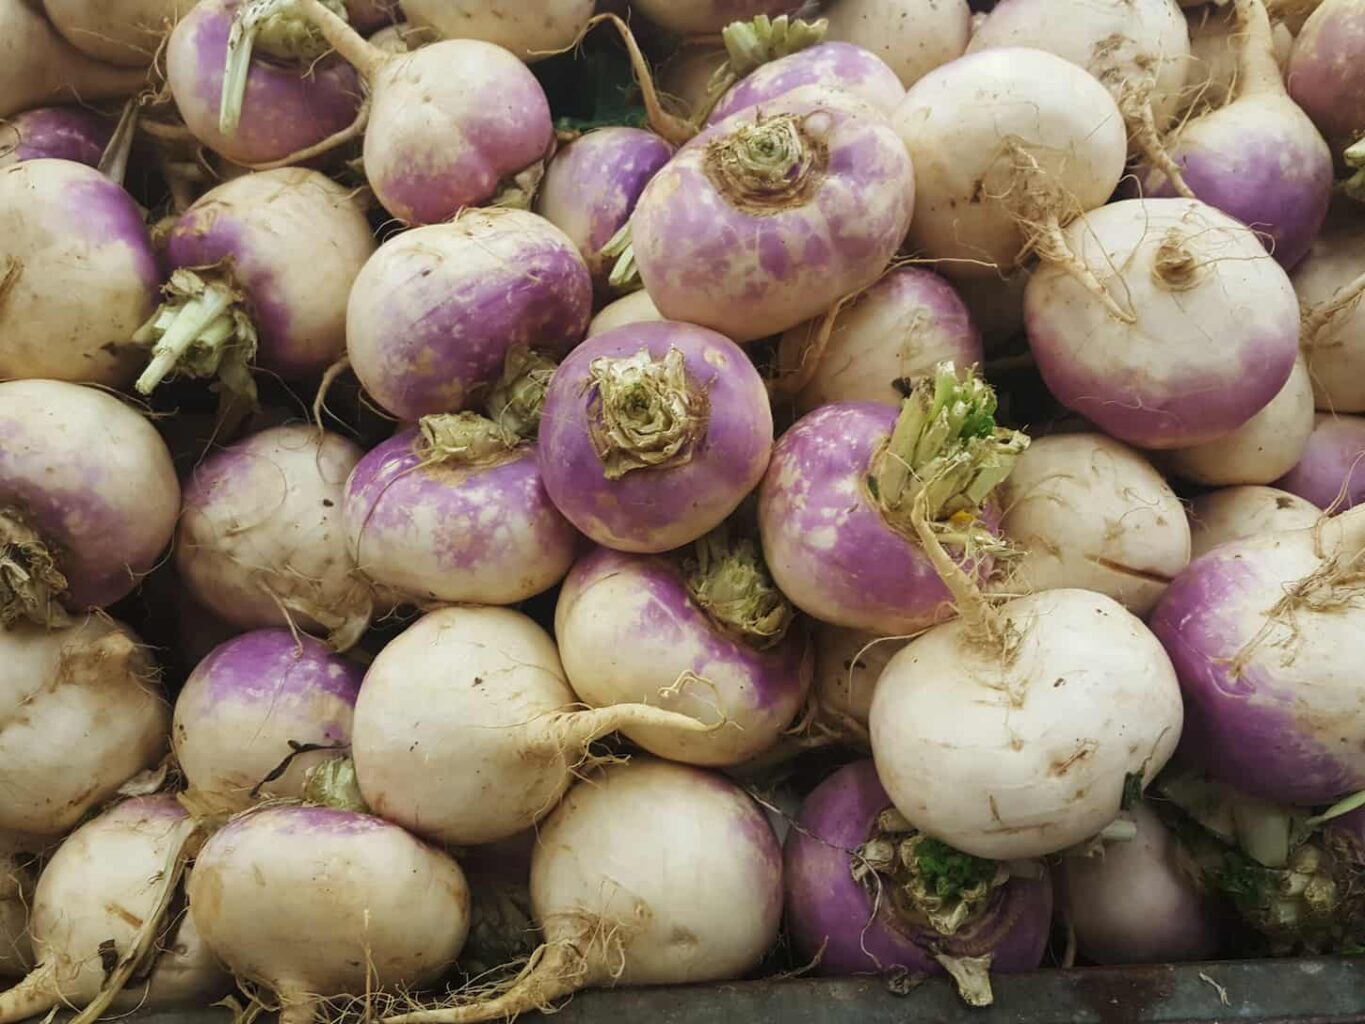 An image of a heap of purple top turnips.